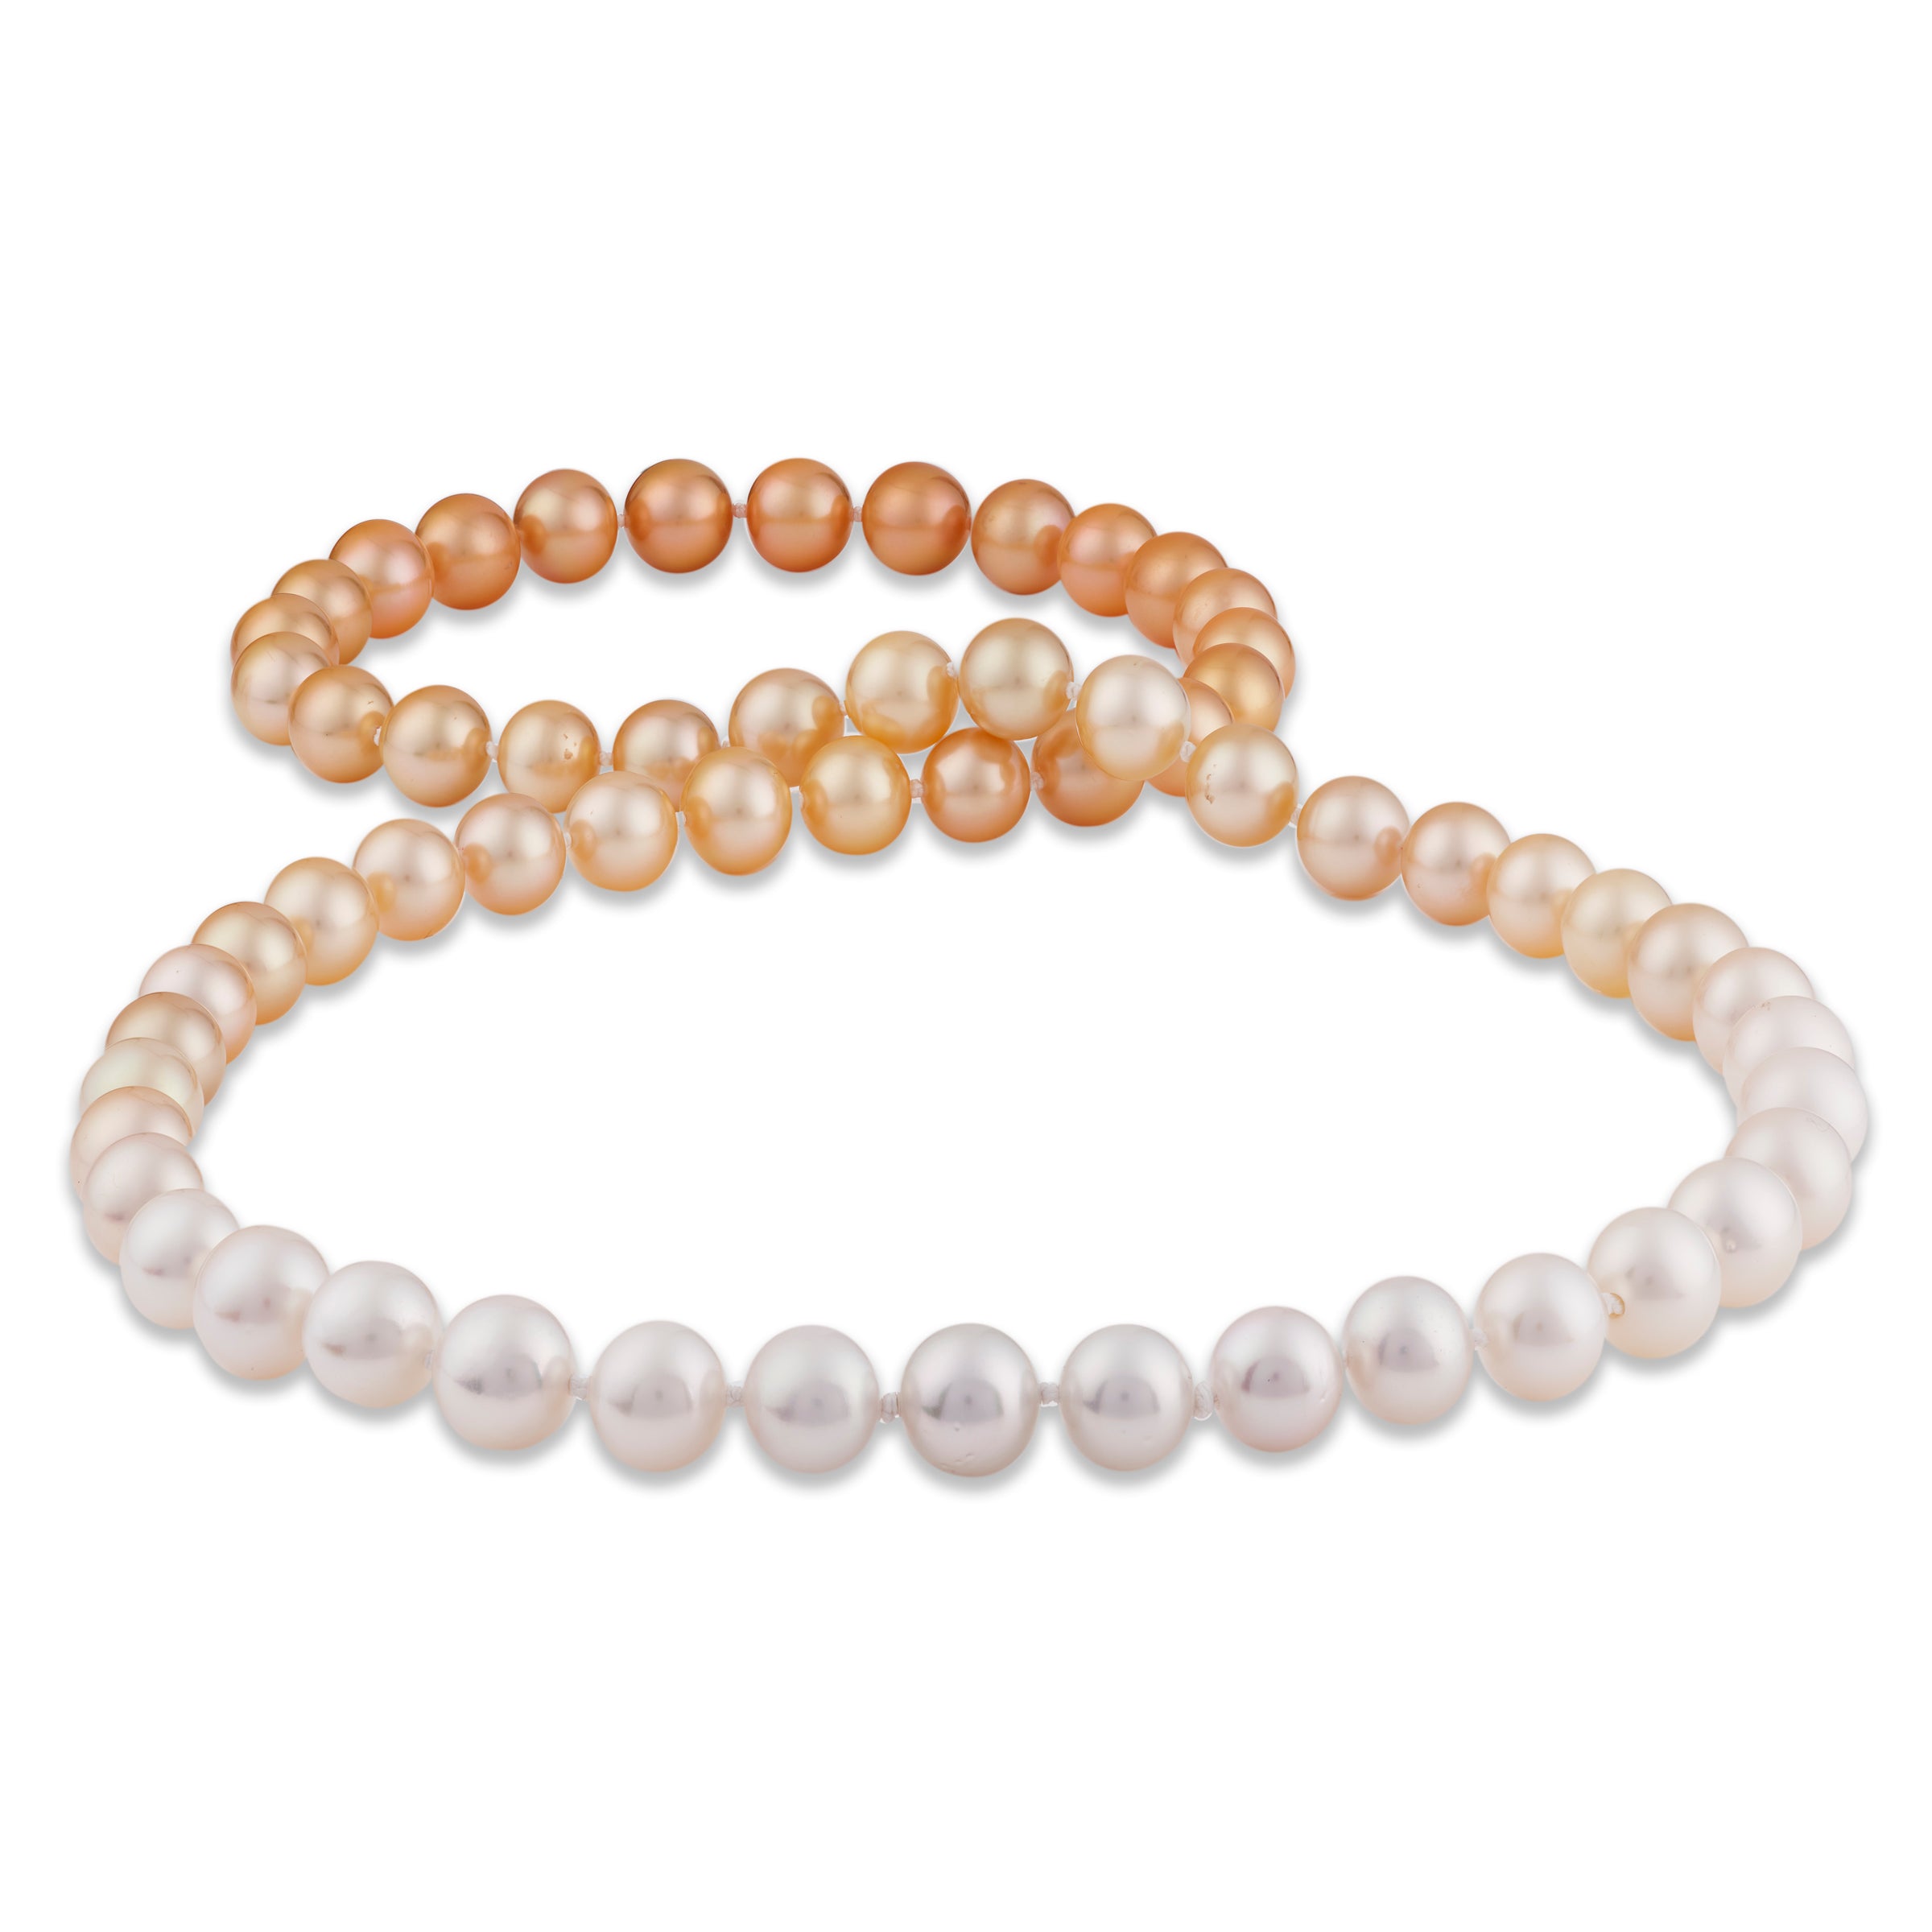 32" Ombre South Sea White and South Sea Gold Pearl Strand - 11-12mm